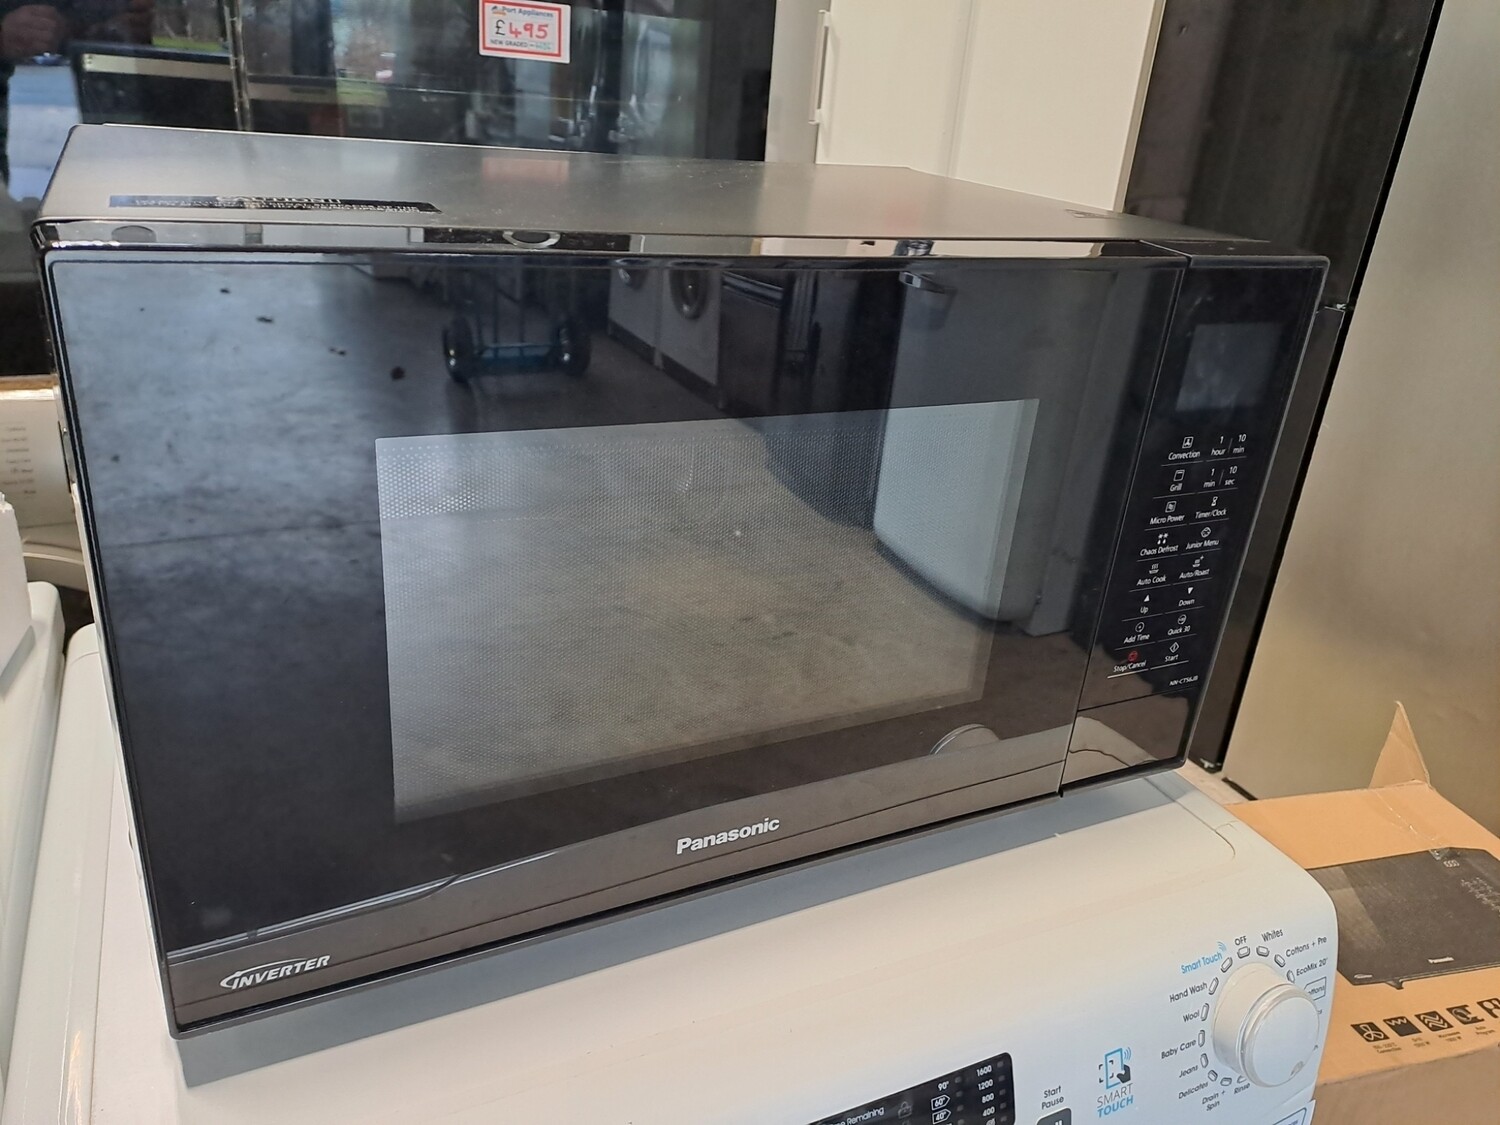 Panasonic NN-CT56JB Microwave Convection Oven & Grill Ceramic 1000w 27 Litre - Black - New Graded - 6 Month Guarantee. This item is located in our Whitby Road Shop 